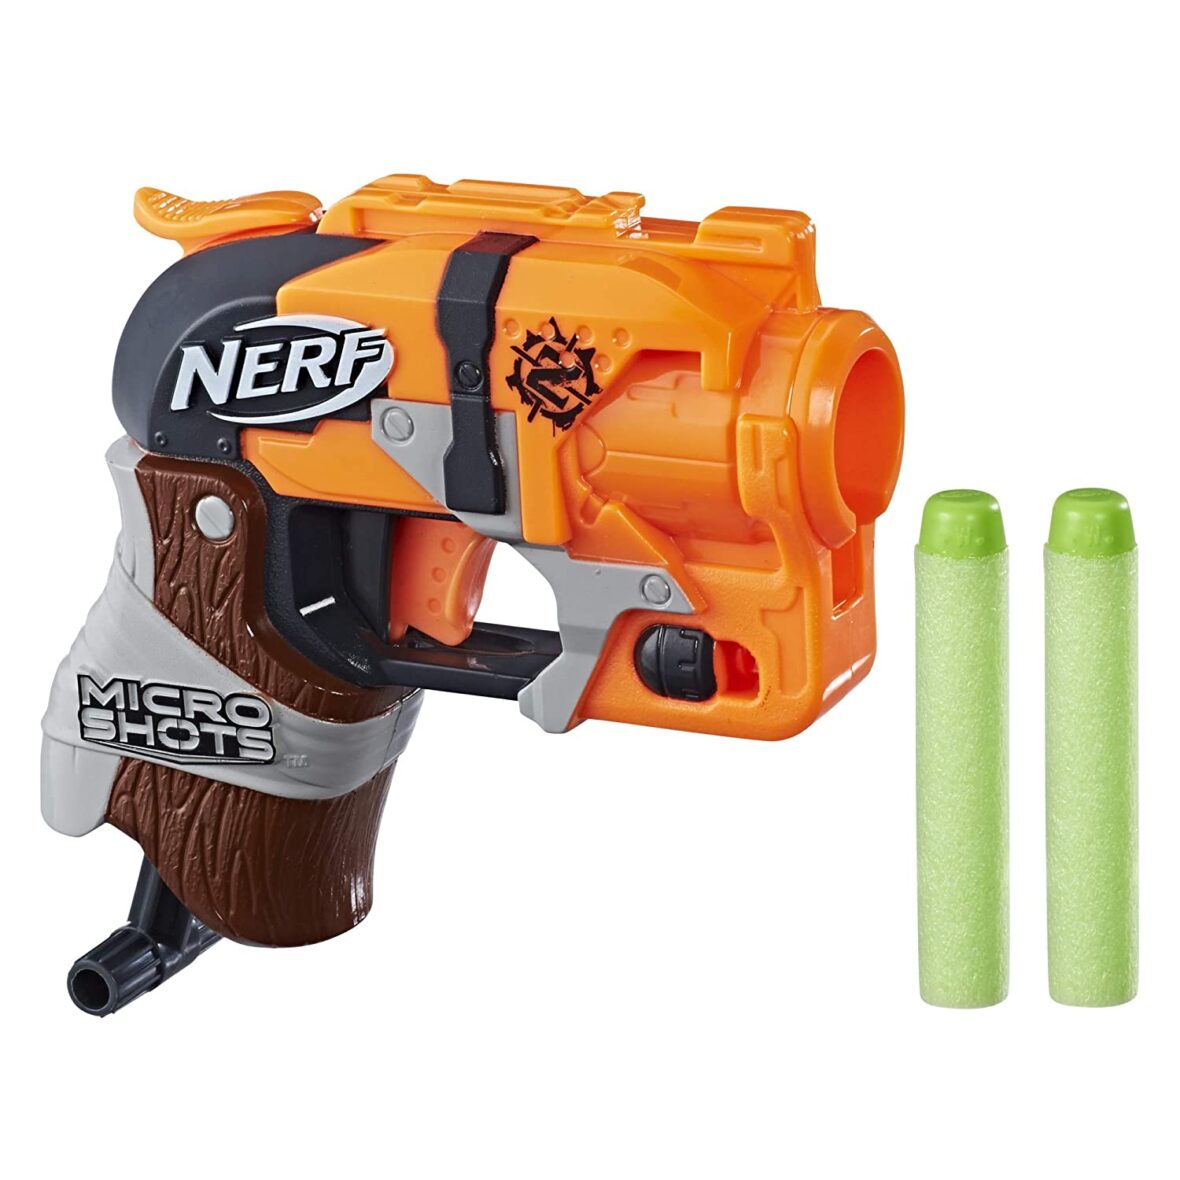 Nerf MicroShots Zombie Strike Hammershot, Includes blaster and 2 darts, For Kids Ages 8 years Old and Up